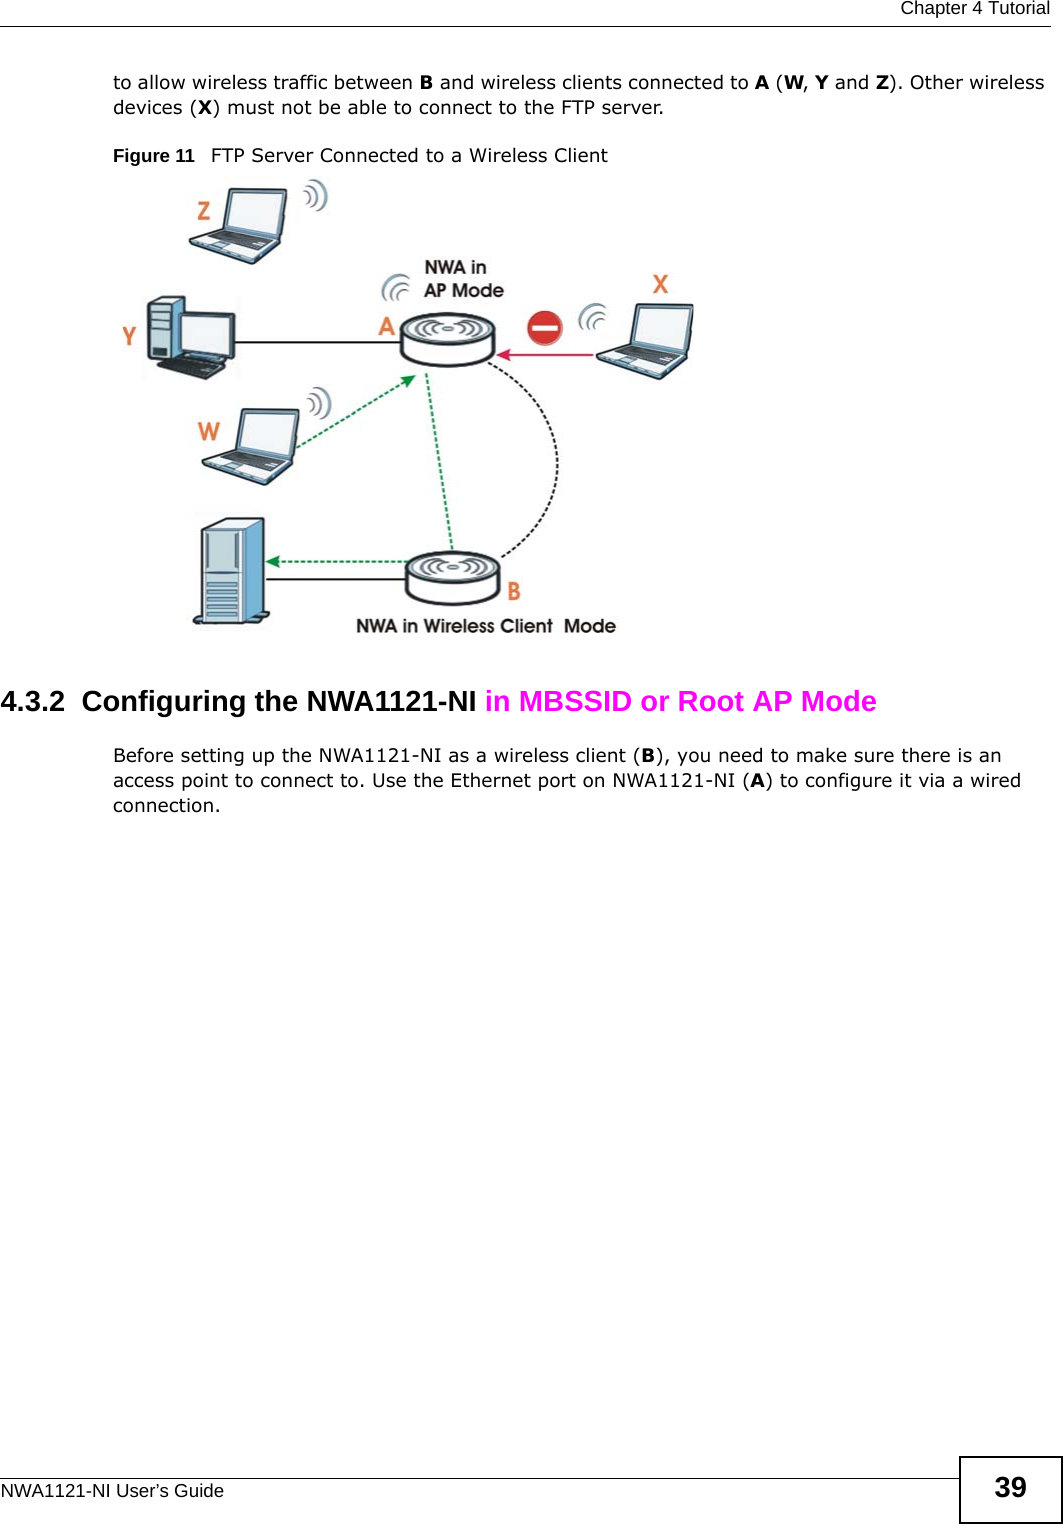  Chapter 4 TutorialNWA1121-NI User’s Guide 39to allow wireless traffic between B and wireless clients connected to A (W, Y and Z). Other wireless devices (X) must not be able to connect to the FTP server. Figure 11   FTP Server Connected to a Wireless Client4.3.2  Configuring the NWA1121-NI in MBSSID or Root AP ModeBefore setting up the NWA1121-NI as a wireless client (B), you need to make sure there is an access point to connect to. Use the Ethernet port on NWA1121-NI (A) to configure it via a wired connection. 